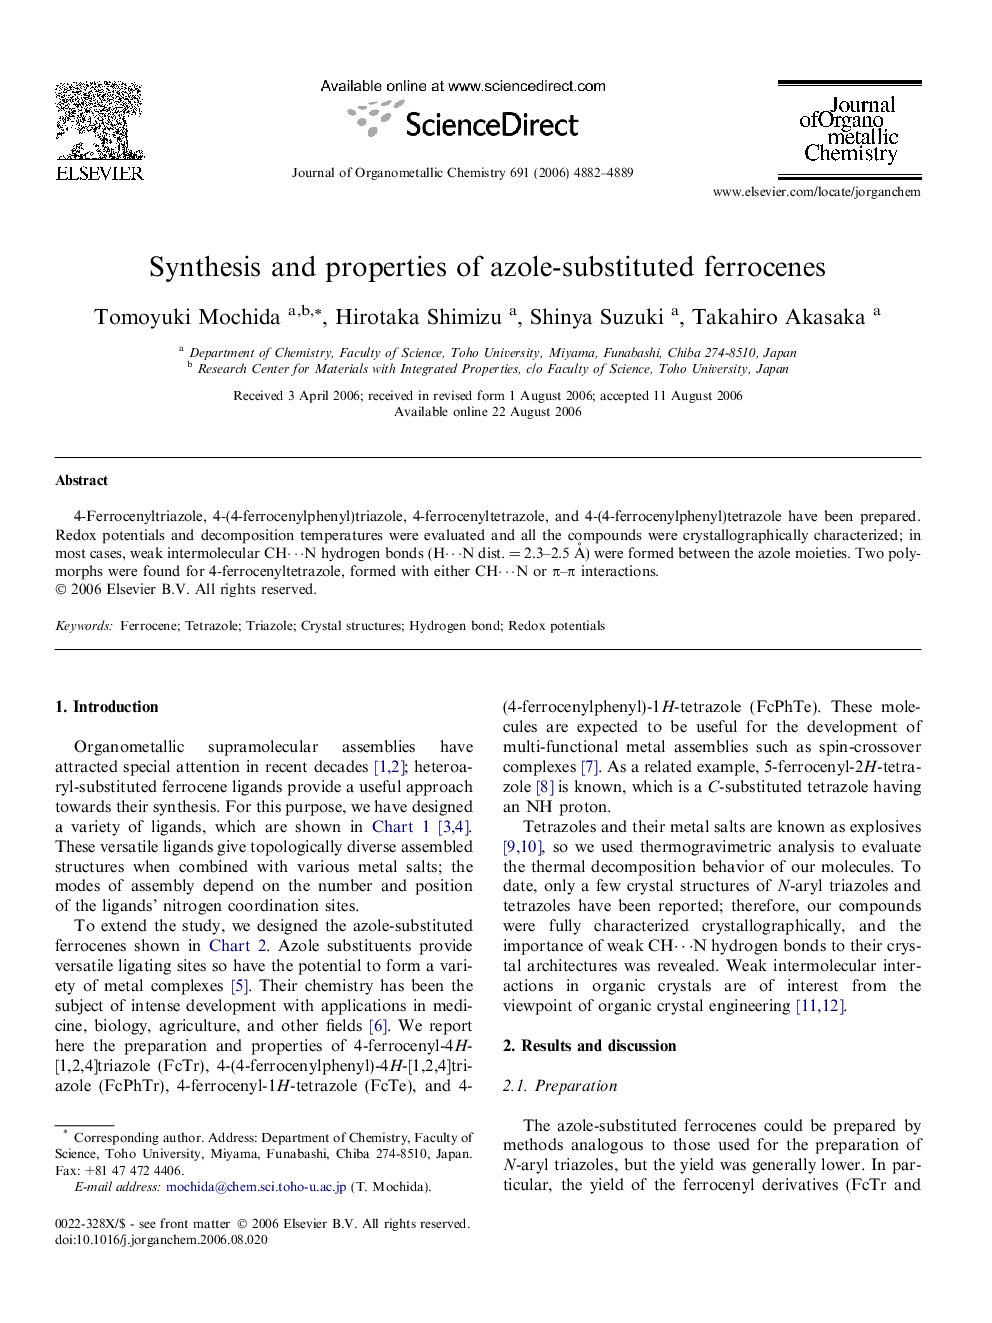 Synthesis and properties of azole-substituted ferrocenes